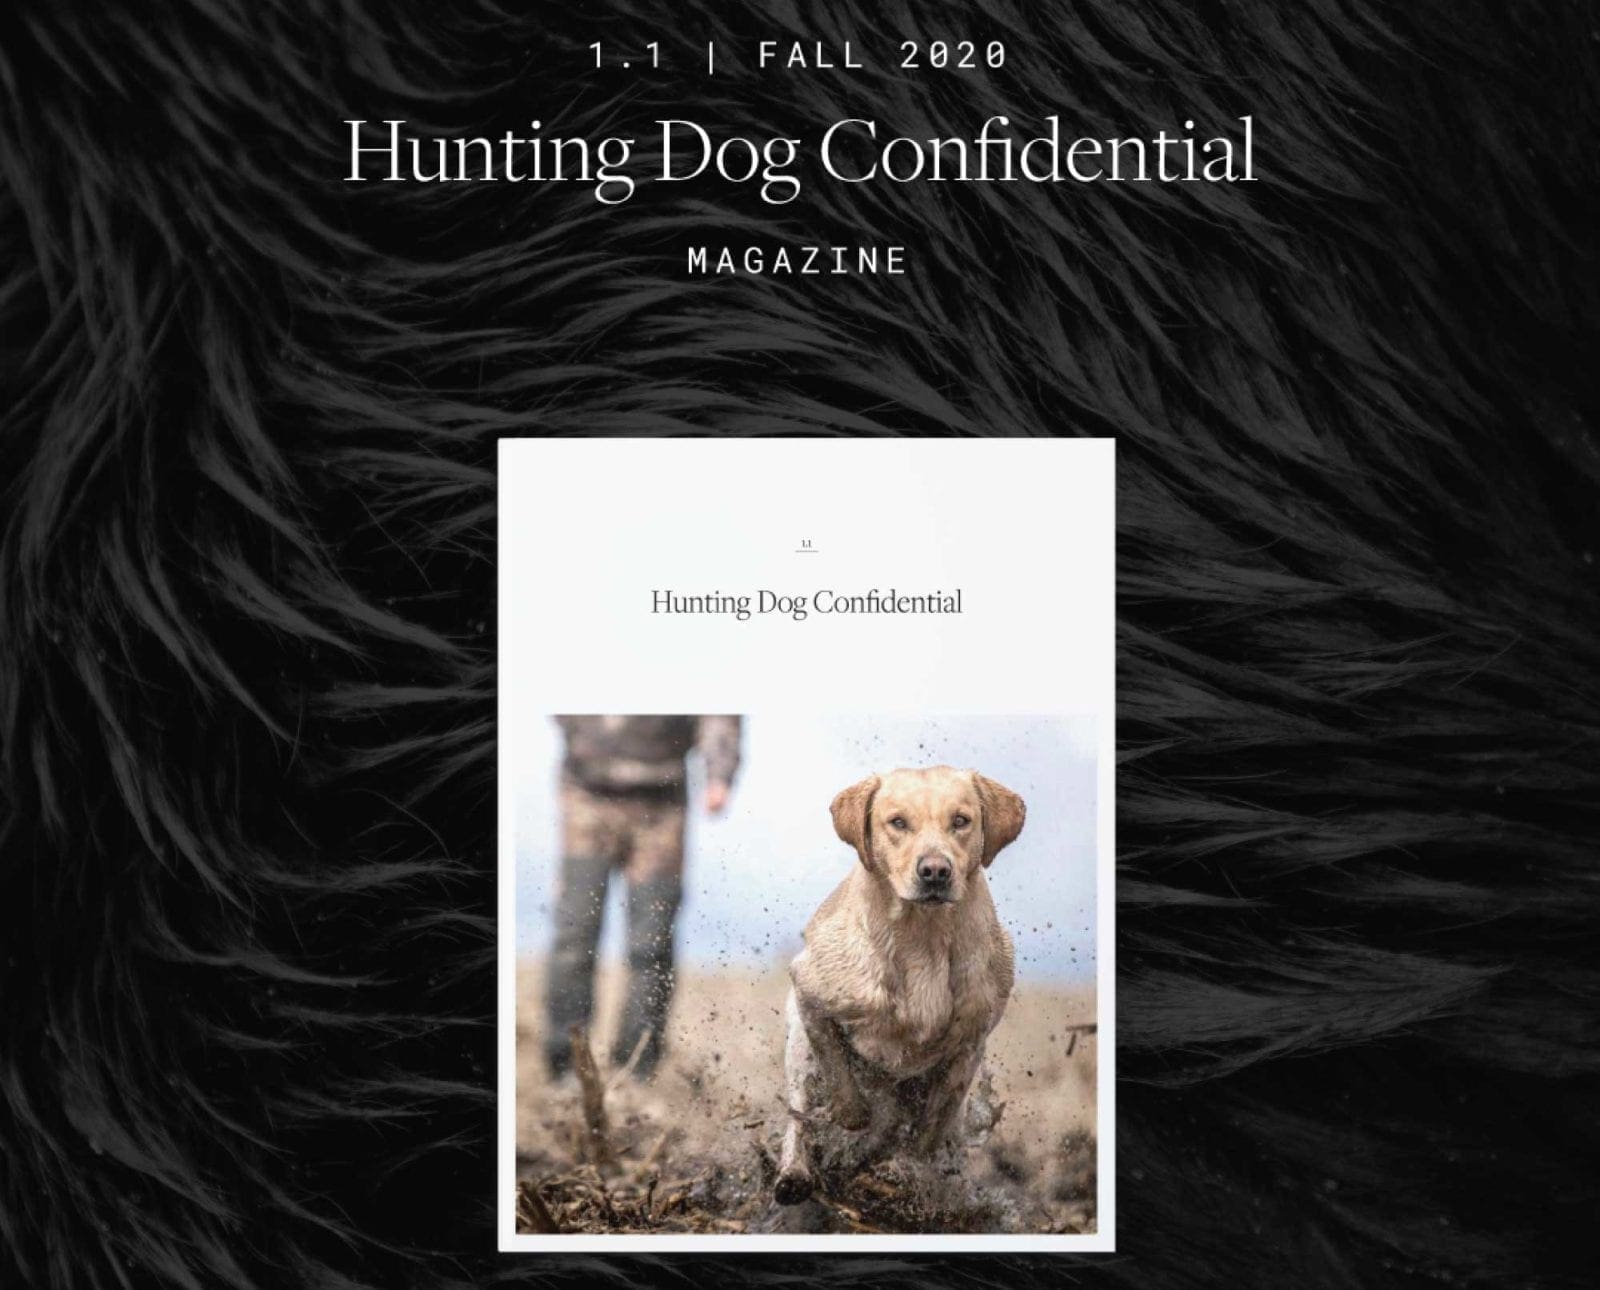 Hunting Dog Confidential – The Magazine - Project Upland